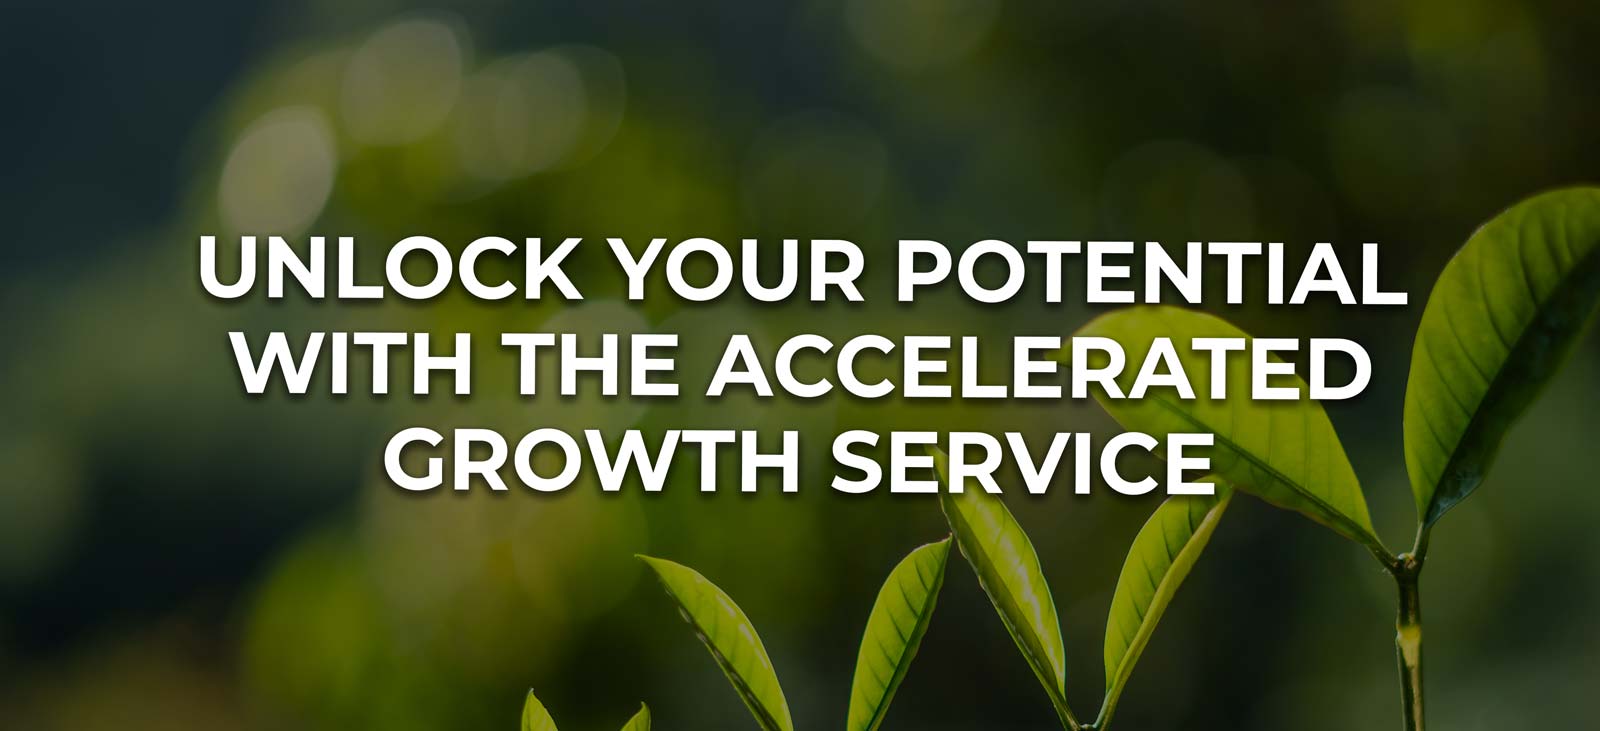 Unlock your potential with the Accelerated Growth Service